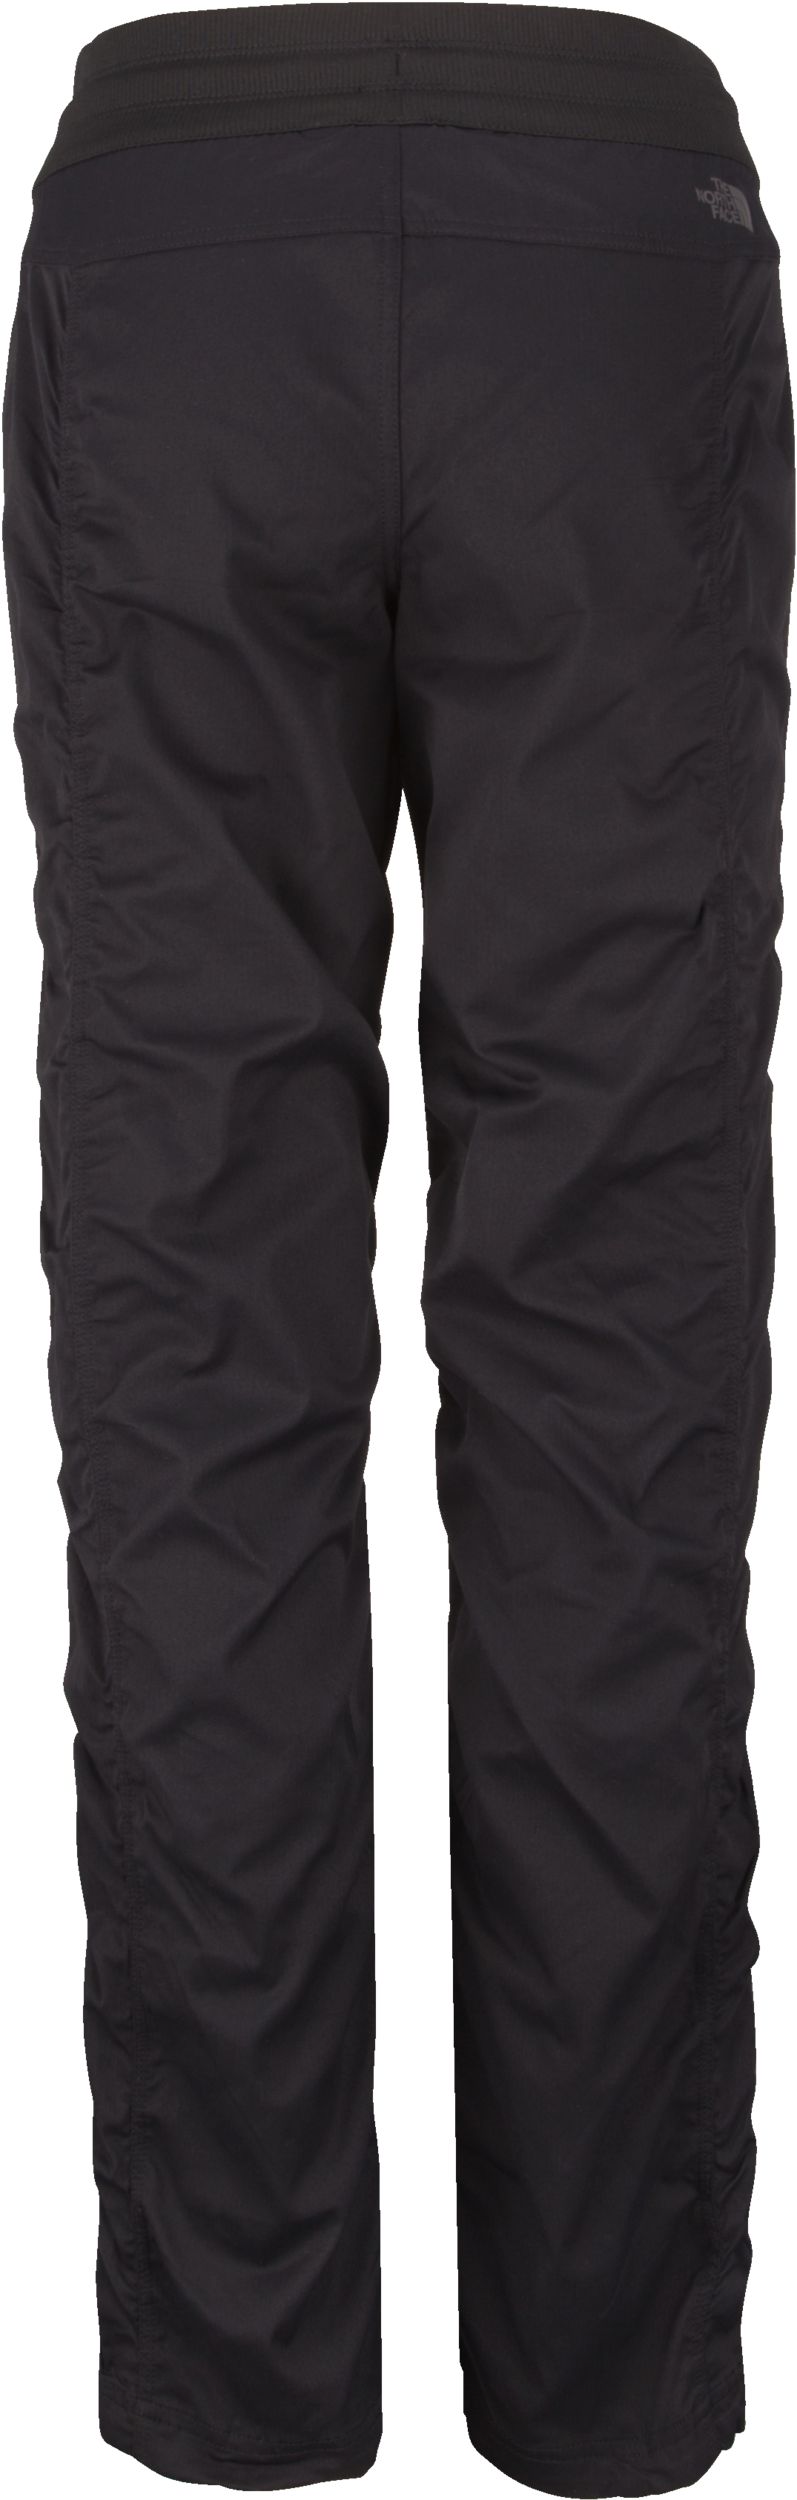 The North Face Women's Aphrodite 2.0 Pants Gear Clothing And Footwear Pants  Women's Pants